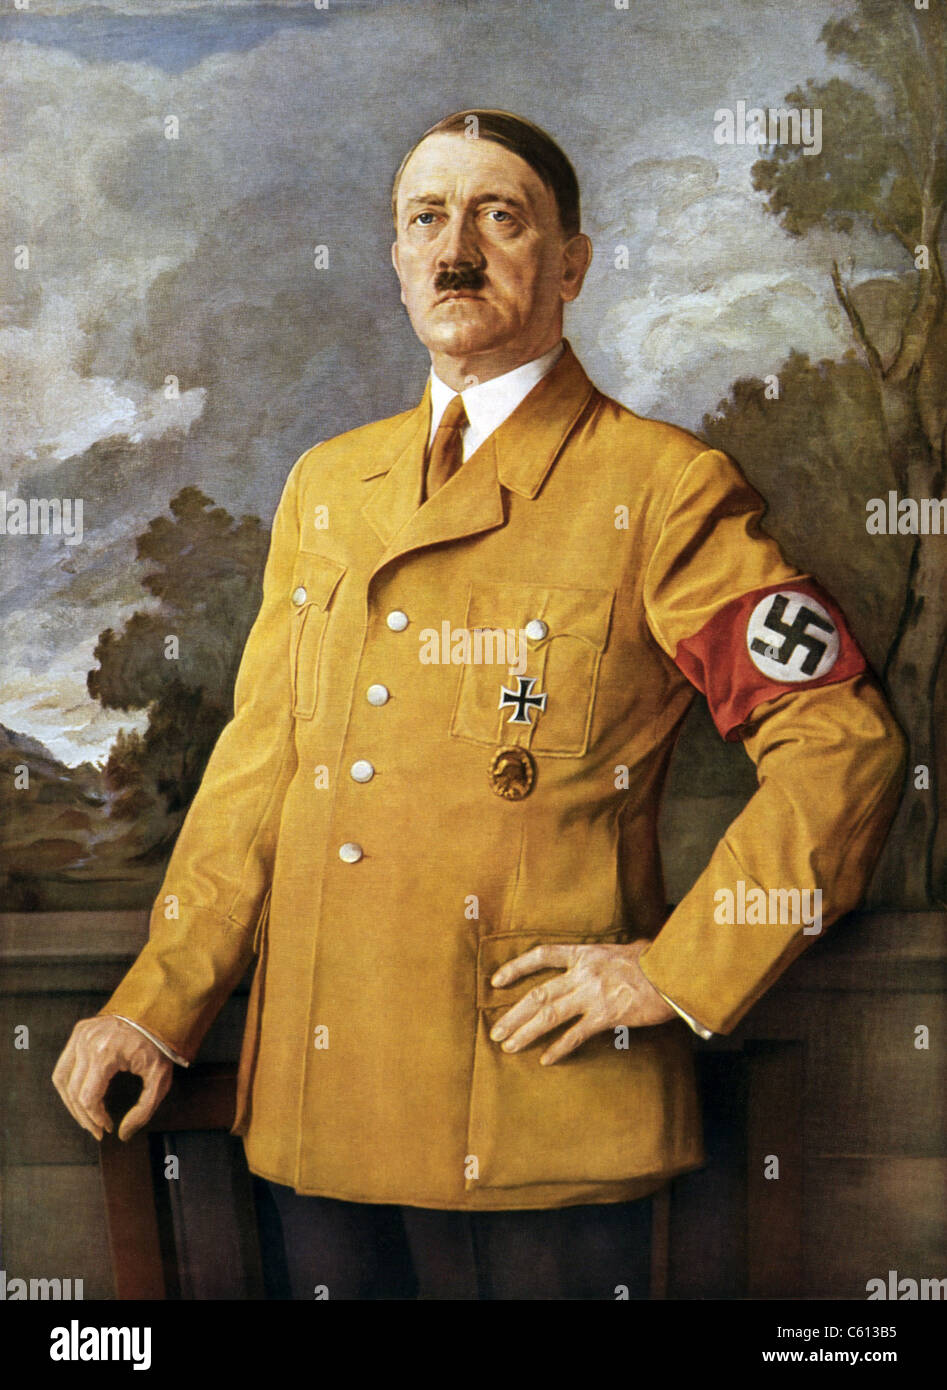 OUR FUHRER, a portrait of Adolf Hitler by Heinrich Knirr. Ca. 1940. Stock Photo